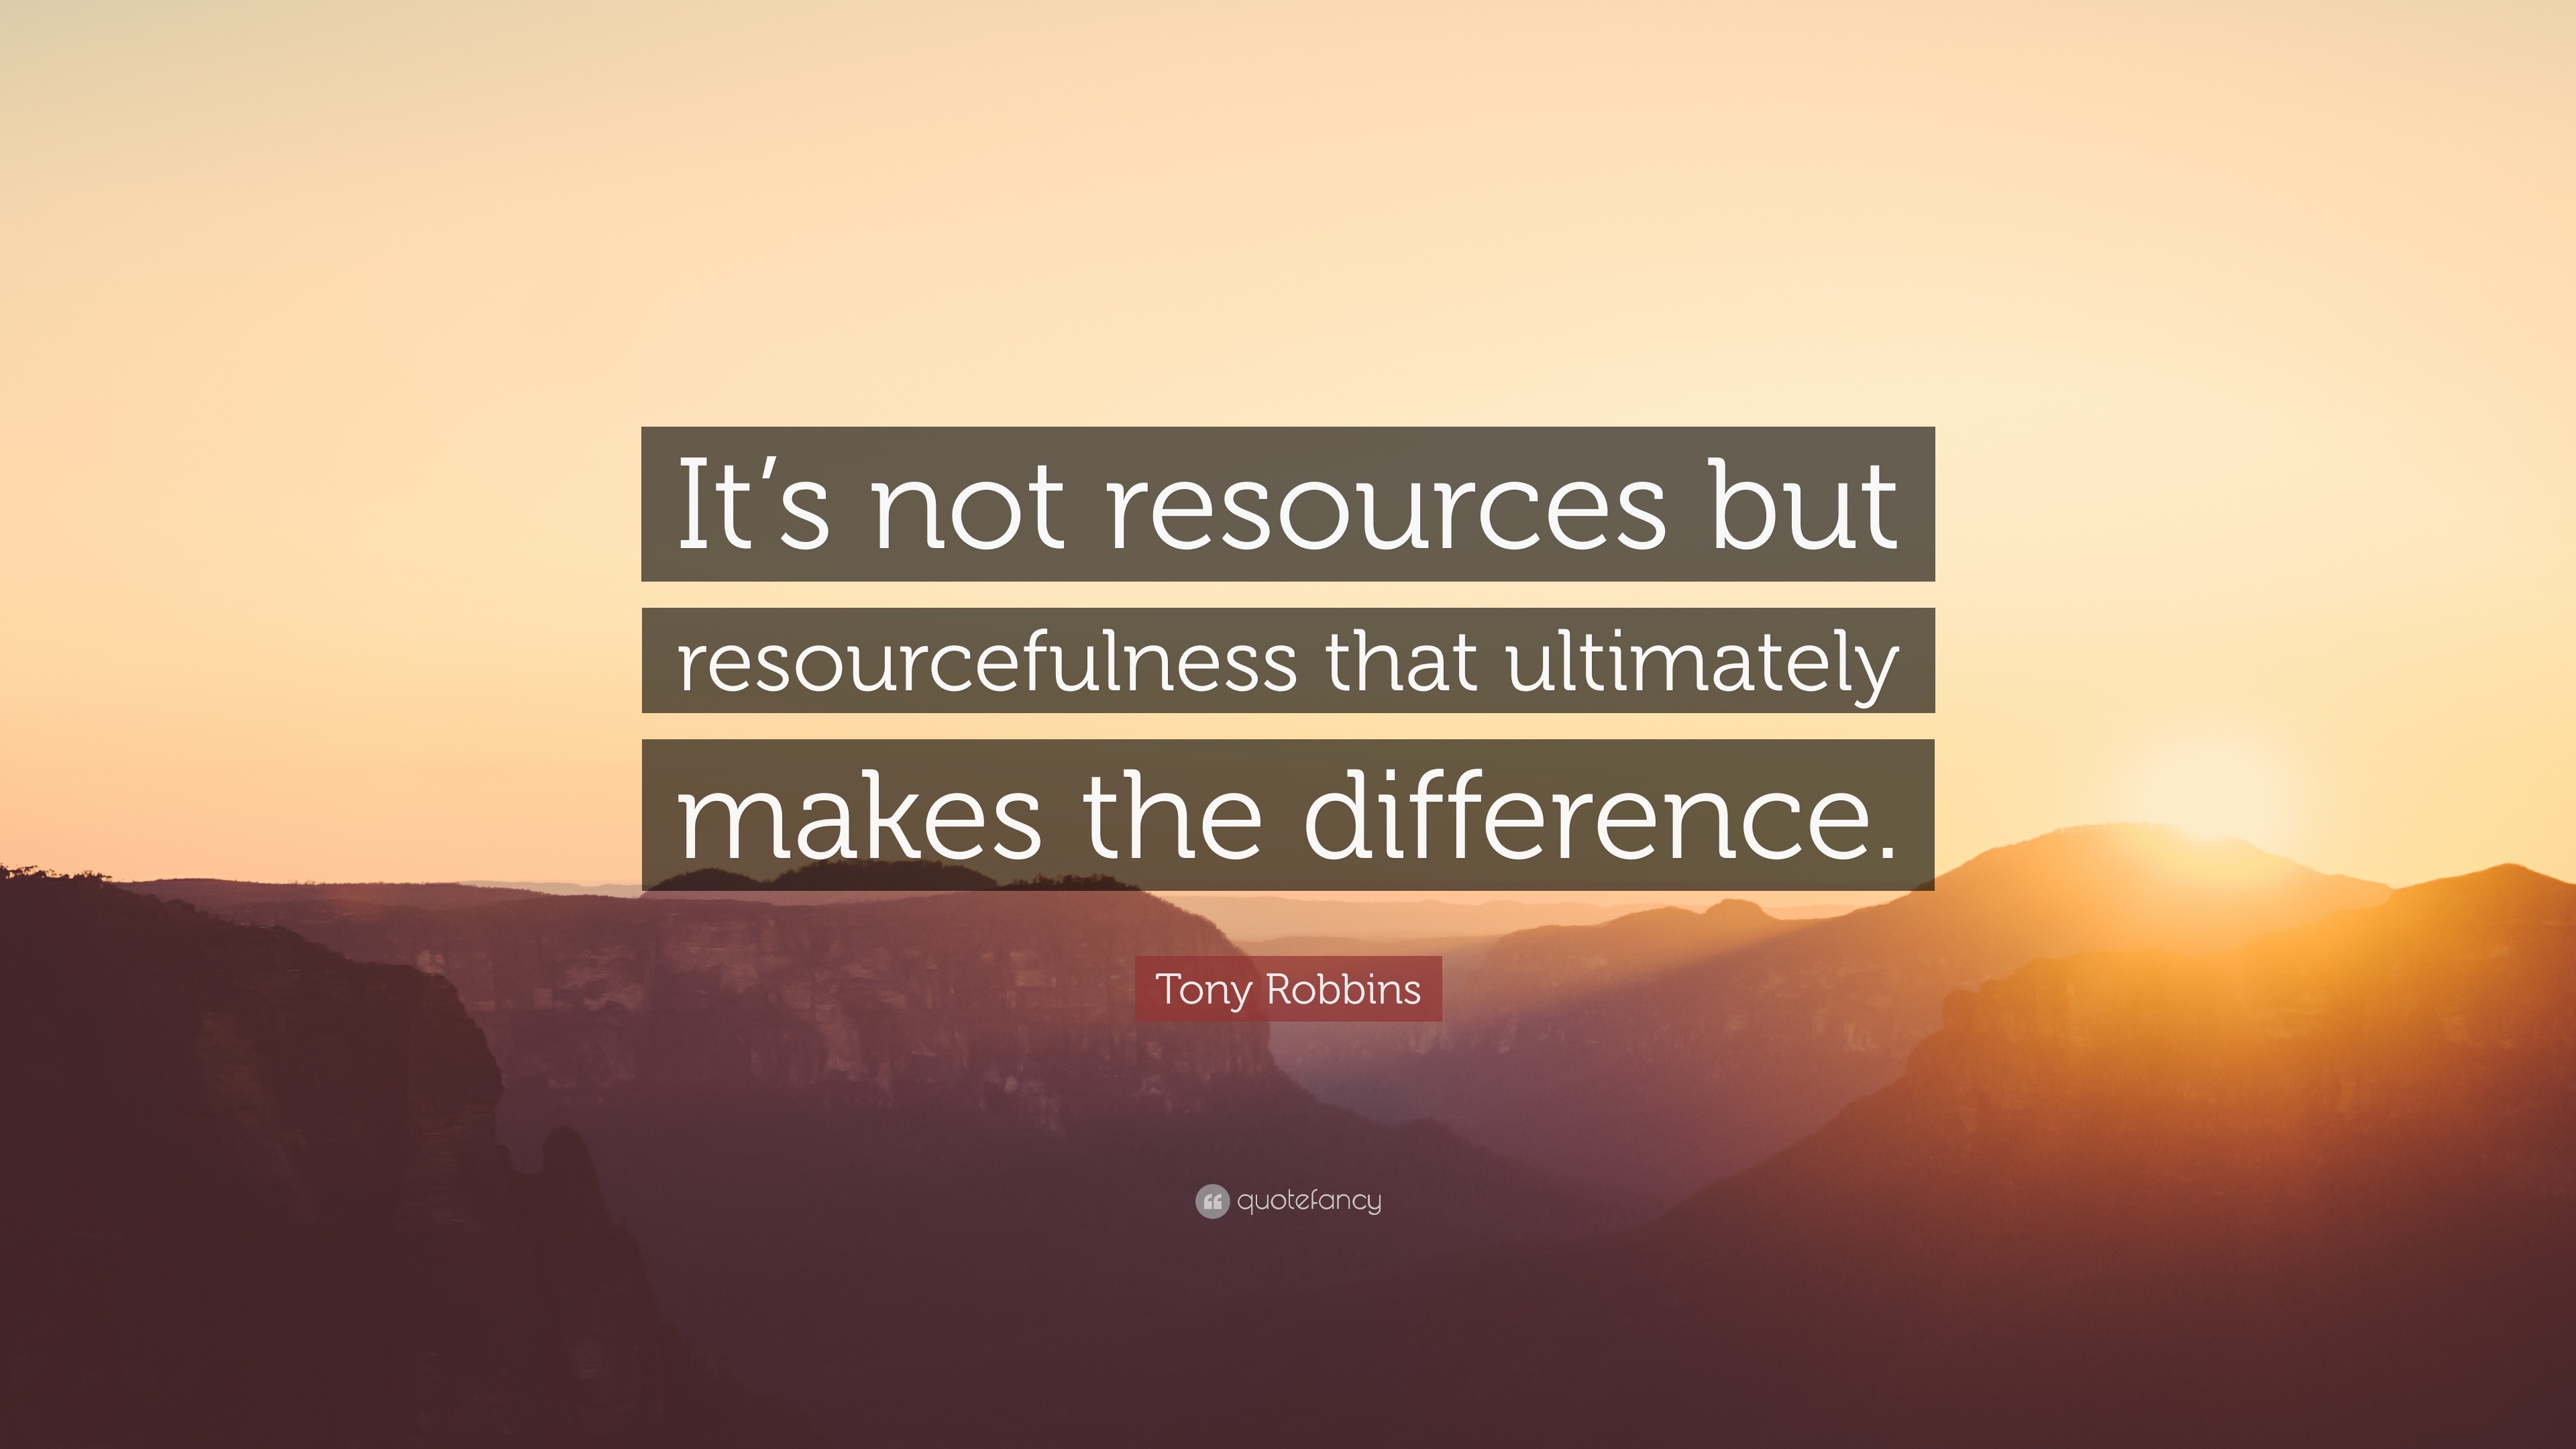 Tony Robbins Quote “its Not Resources But Resourcefulness That Ultimately Makes The Difference” 1198